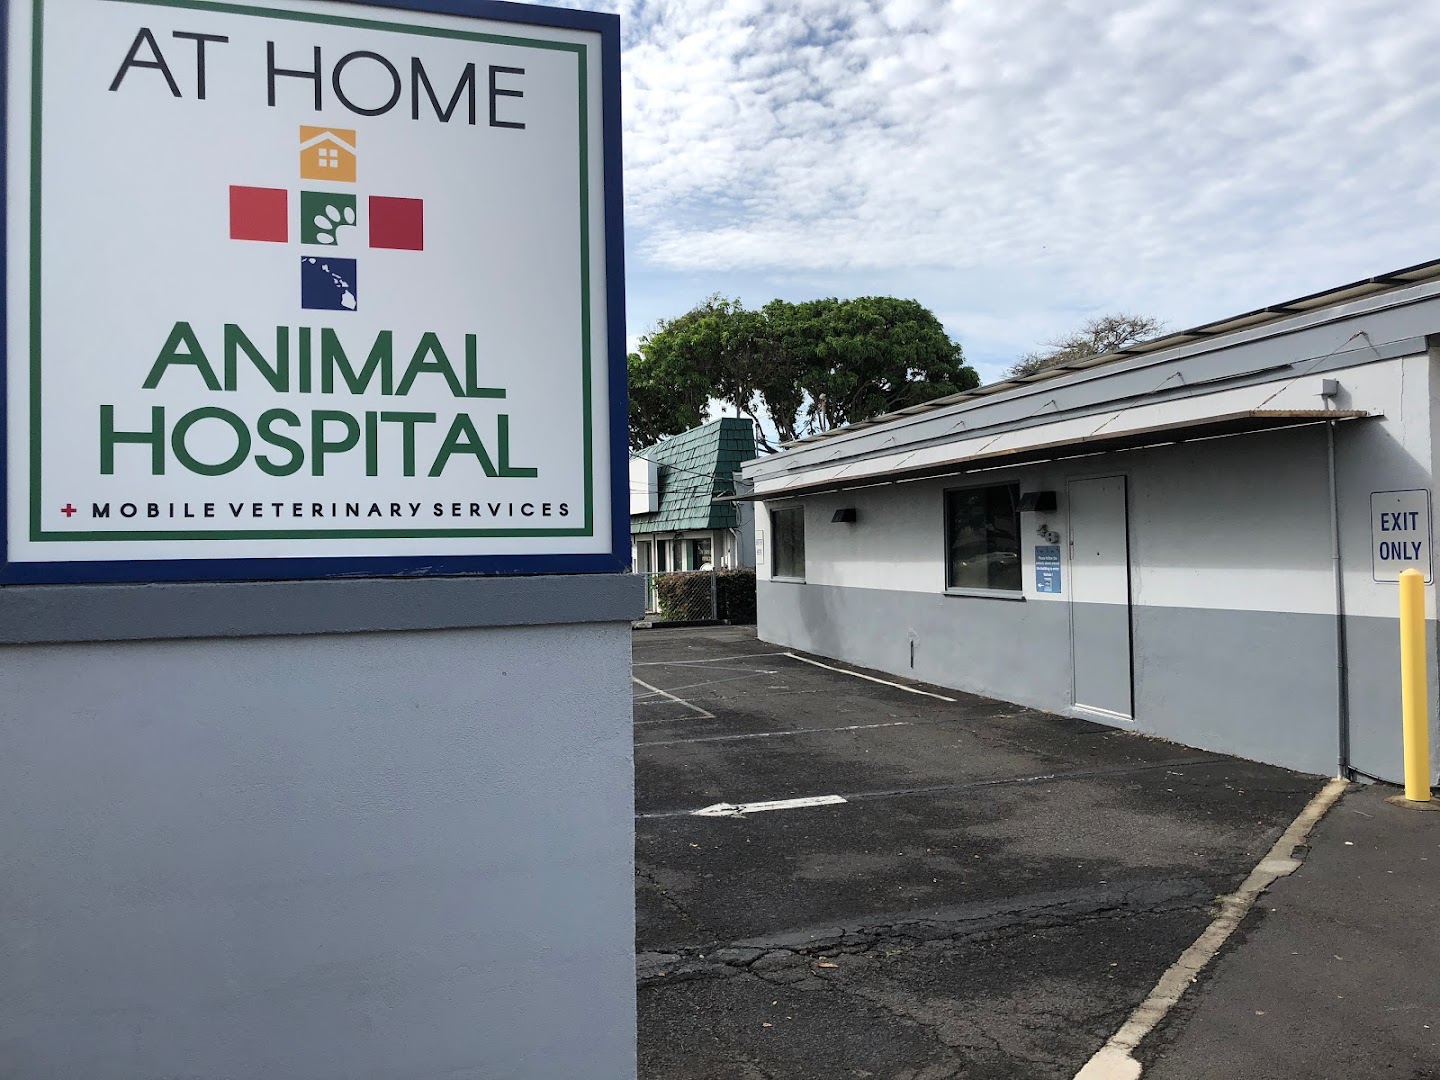 At Home Animal Hospital and Mobile Veterinary Services